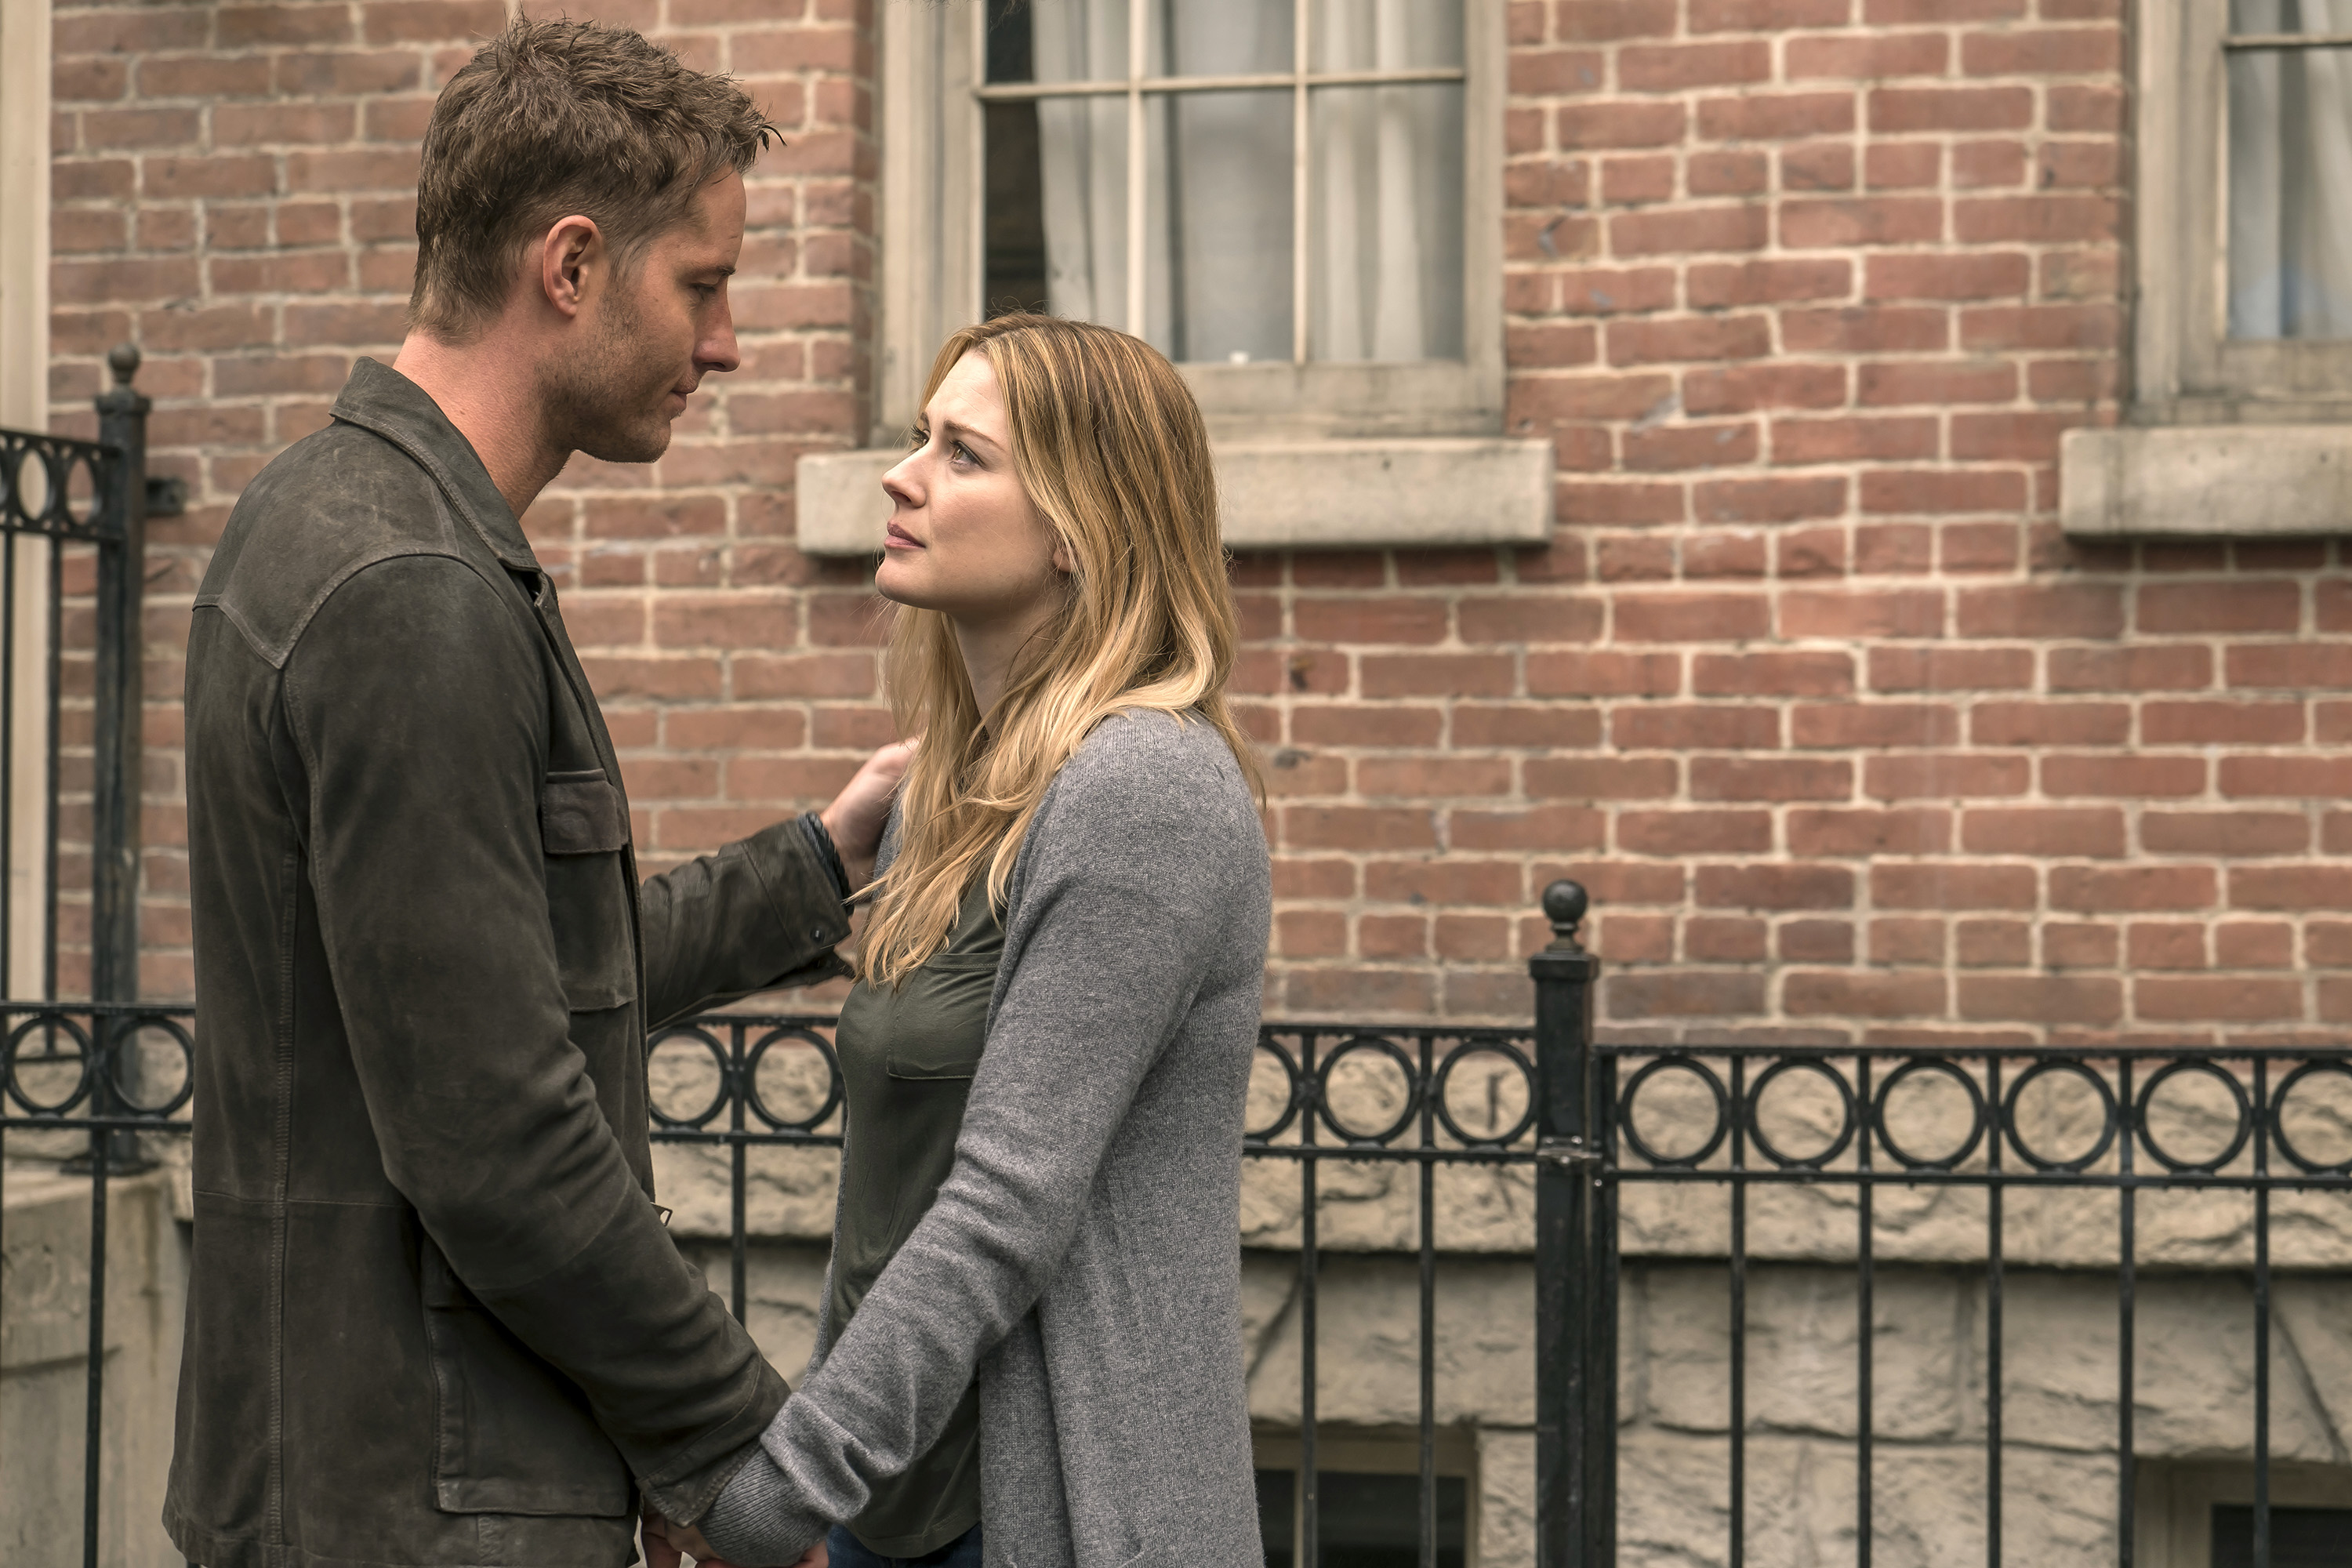 Justin Hartley and Alexandra Breckenridge, stars of 'This Is Us,' share a scene as Kevin and Sophie. Kevin, who is holding Sophie's hand and places his other hand on her shoulder, wears a dark gray jacket. Sophie wears a light gray cardigan over a dark green shirt.